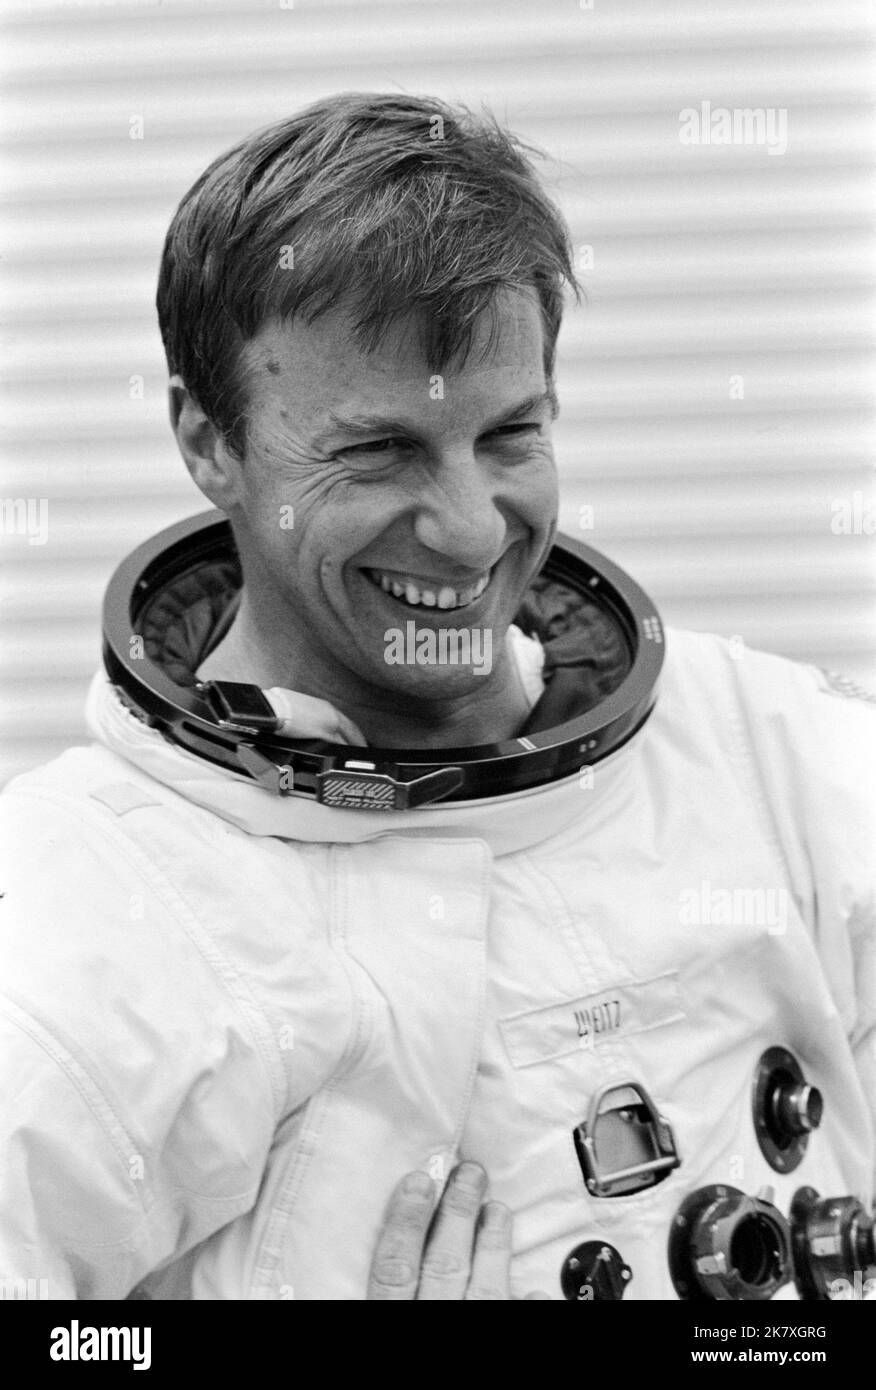 Astronaut Paul J. Weitz, pilot for the Skylab 2 first manned mission, is suited up for Skylab training activity in the mission simulation and training facility at the Manned Spacecraft Center Stock Photo